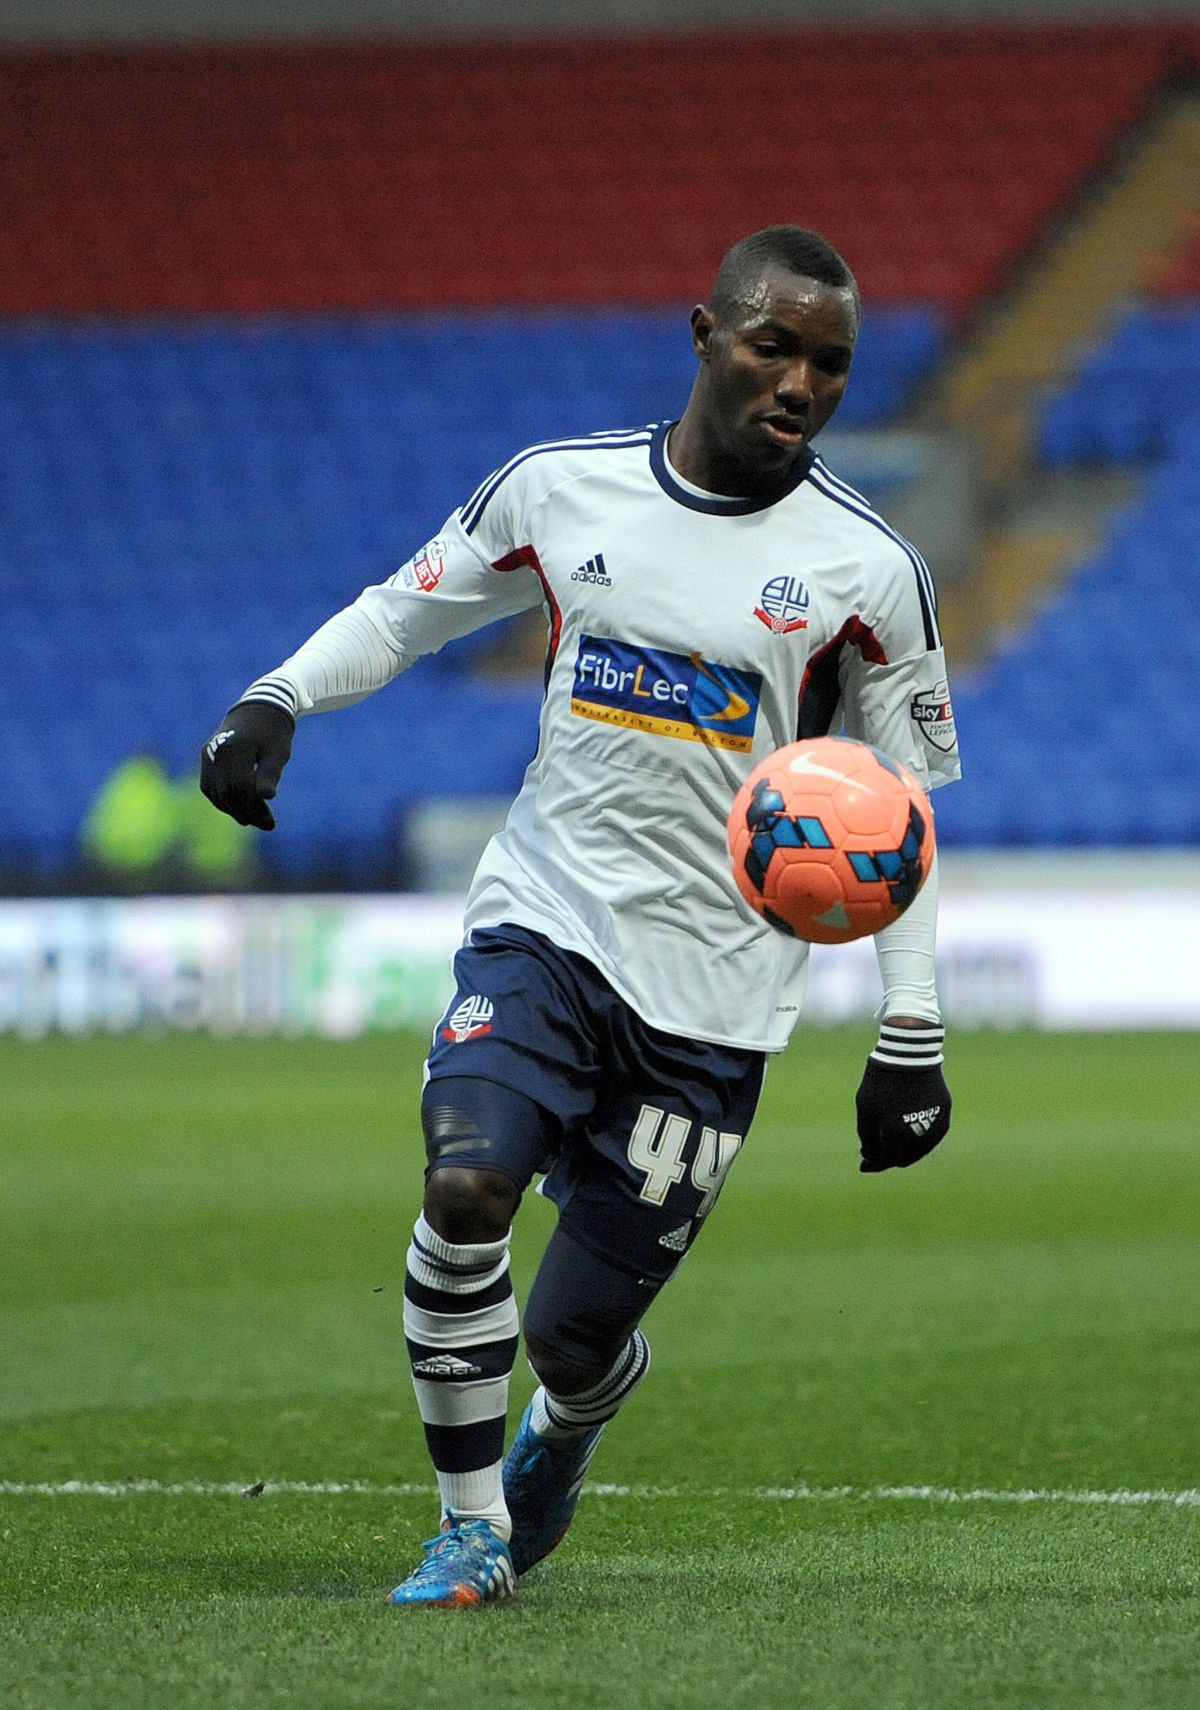 Bolton Wanderers v Blackpool - FA Cup Third Round